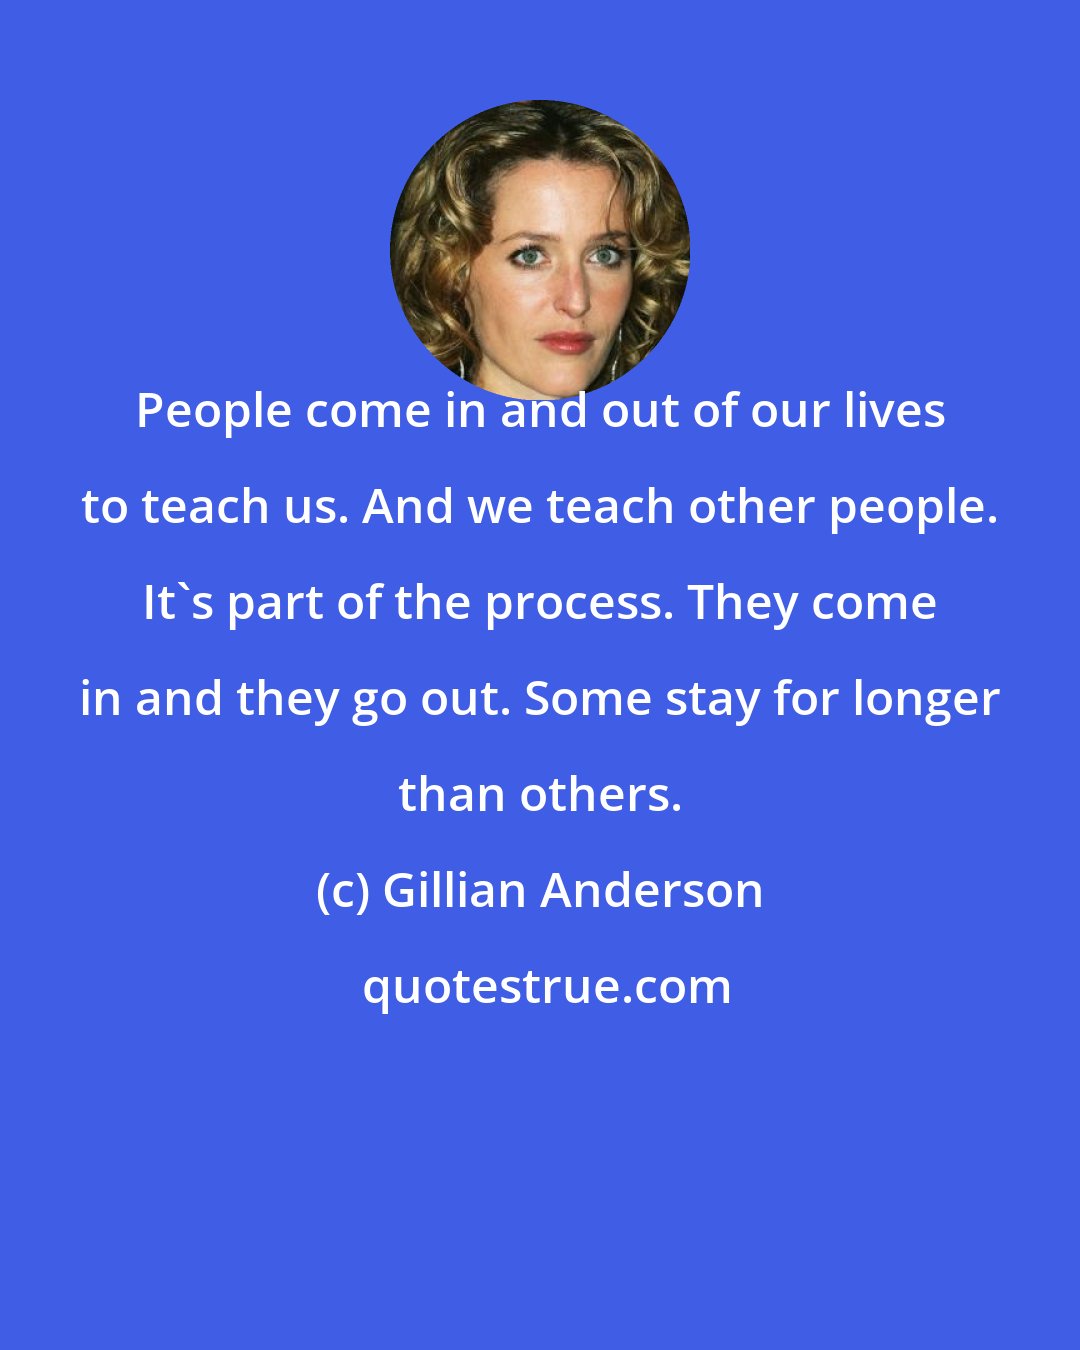 Gillian Anderson: People come in and out of our lives to teach us. And we teach other people. It's part of the process. They come in and they go out. Some stay for longer than others.